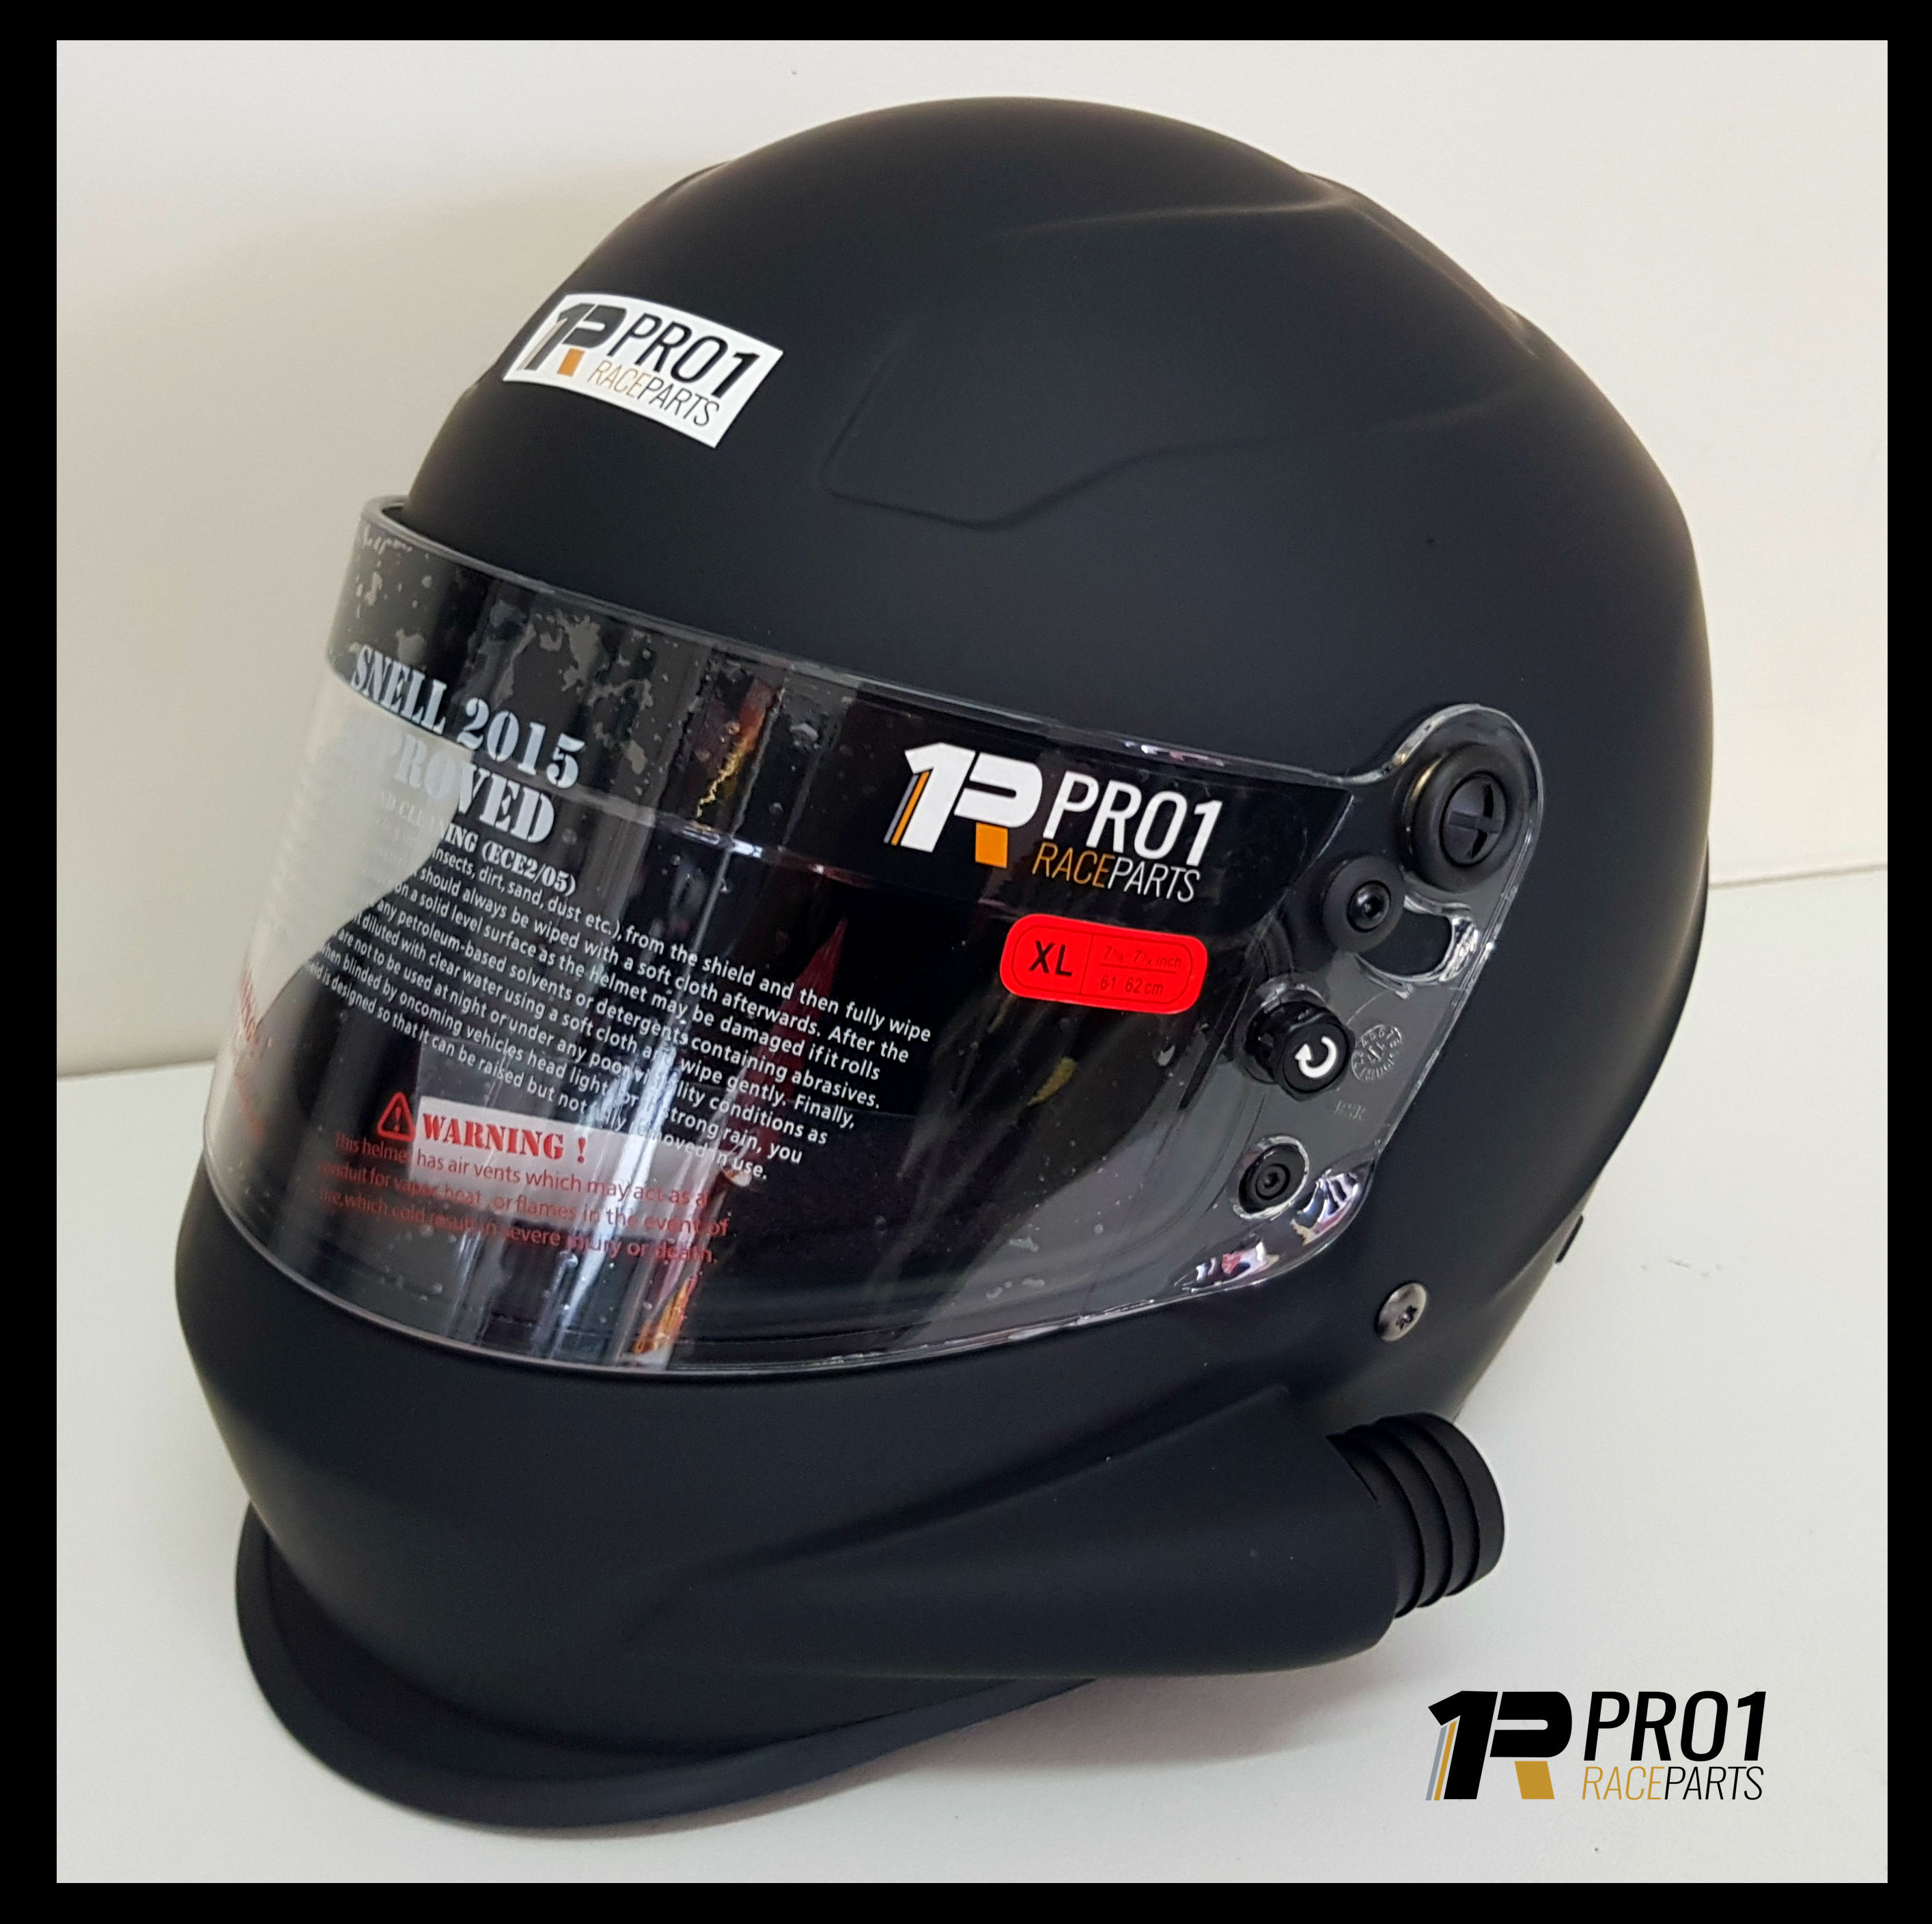 Pro 1 Snell 2015 Side Air Helmet Flat Black - Pro1 Race Parts | Speedway | Drag Car | Rally | Go 